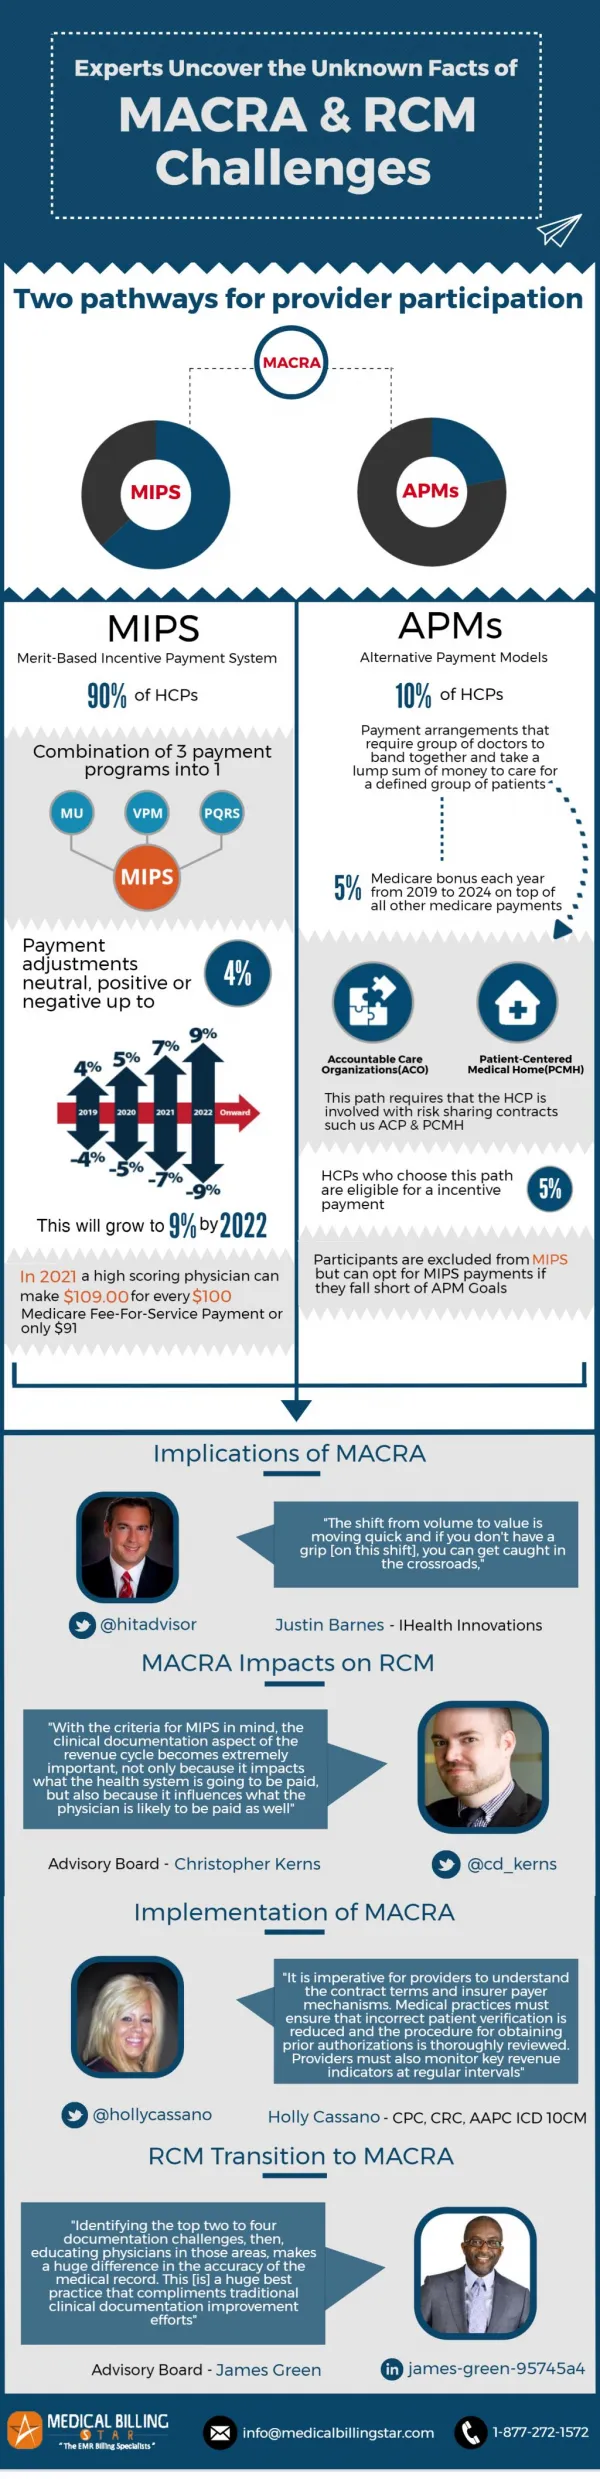 MACRA Uncovered Facts and RCM Challenges